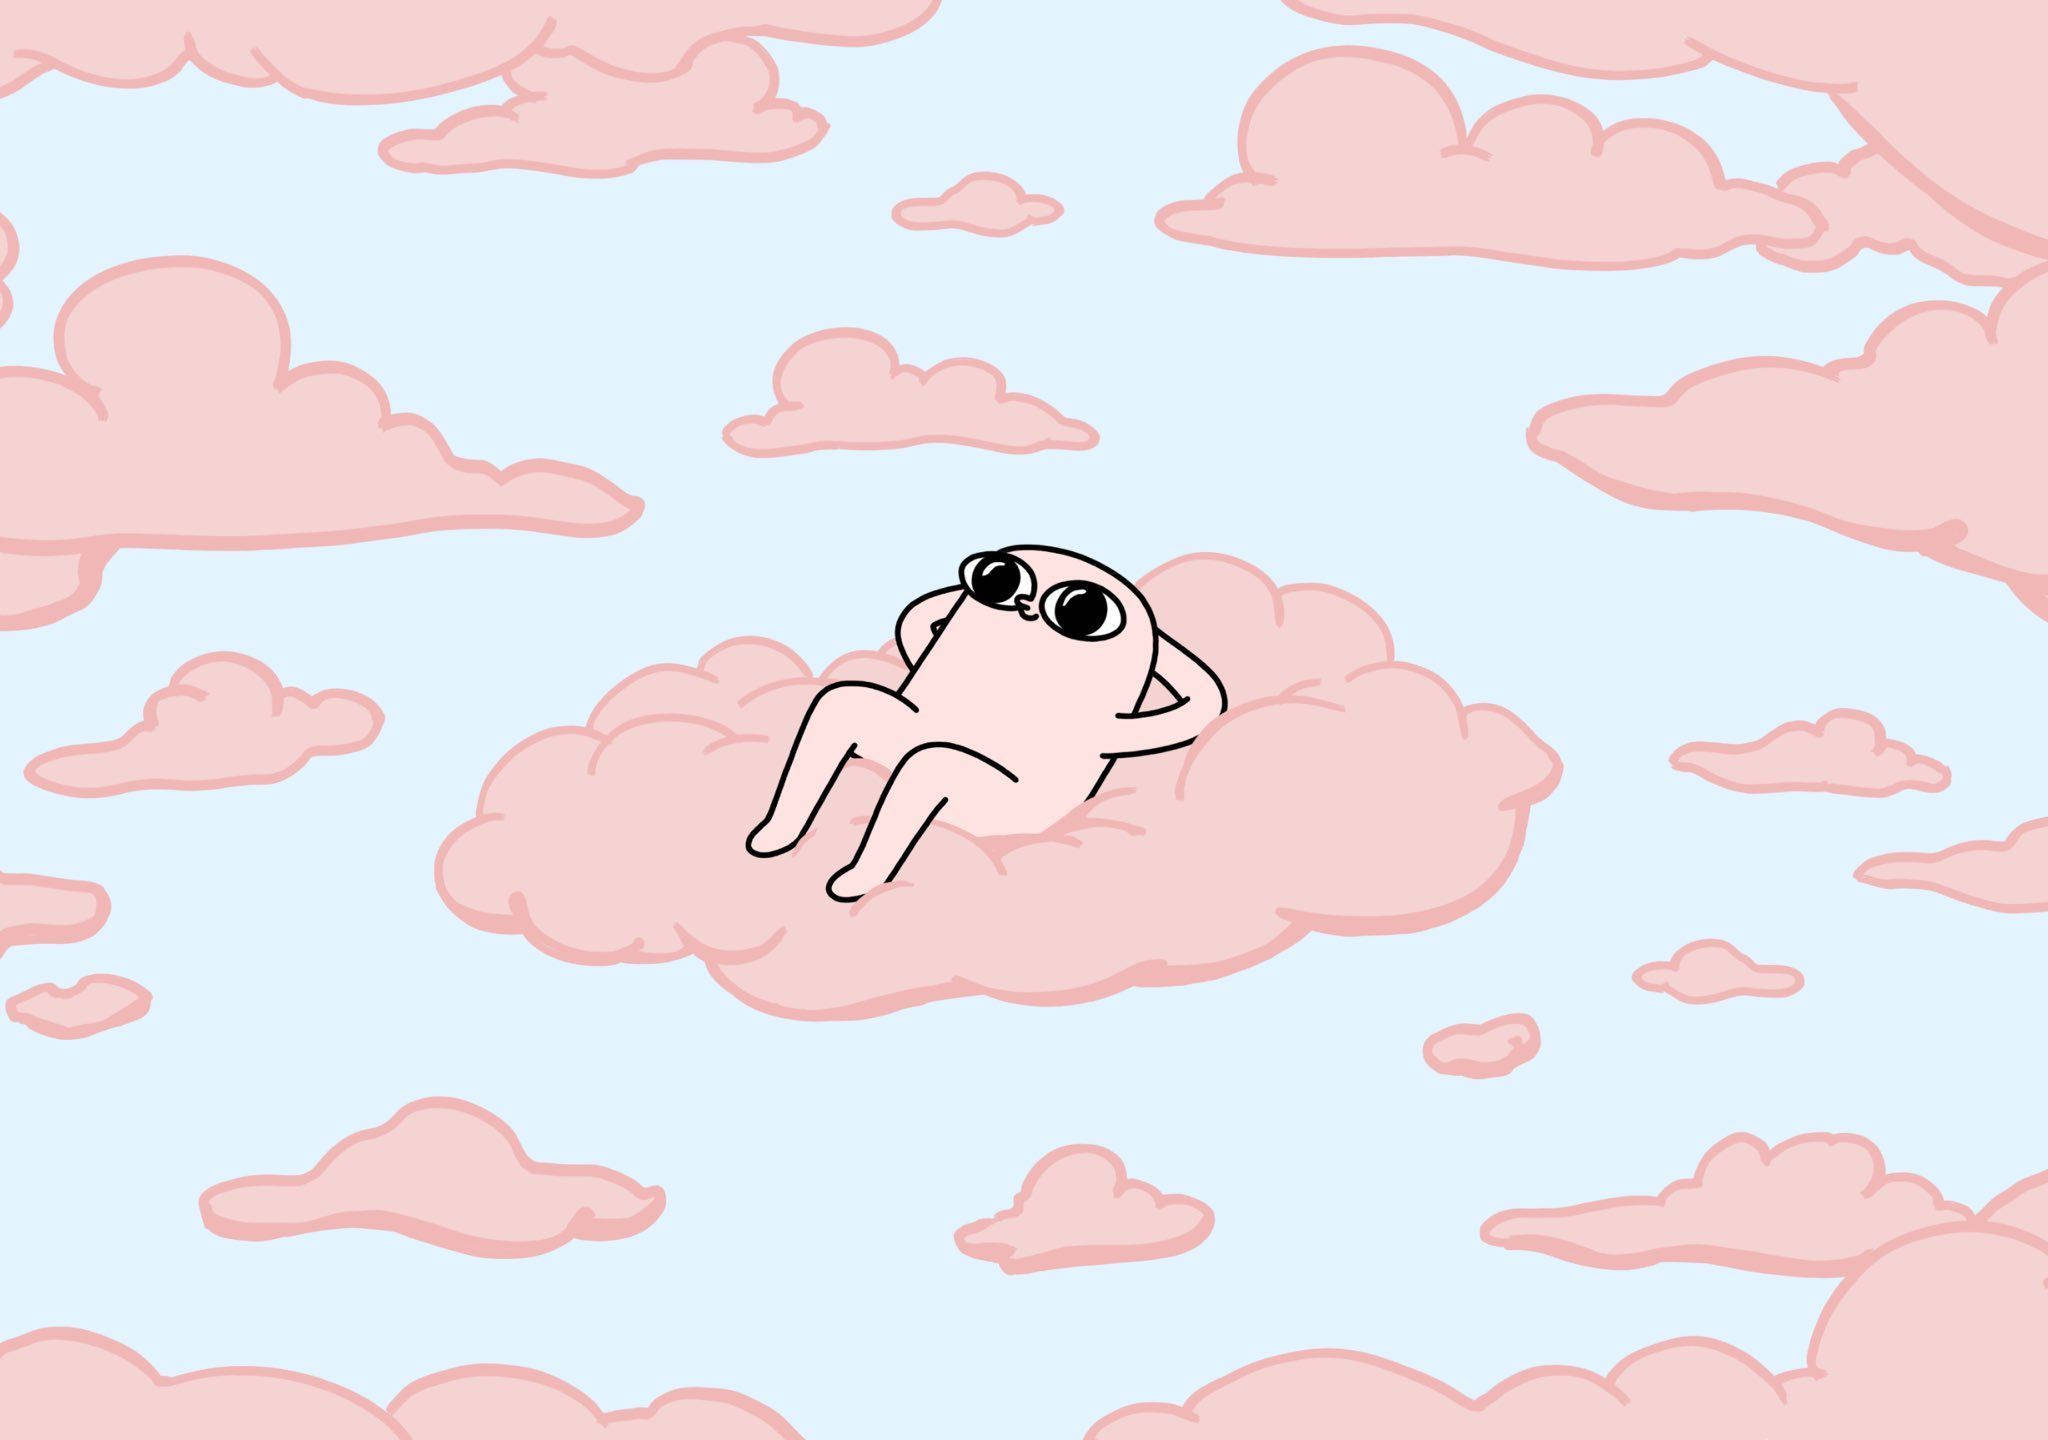 Ketnipz Chilling On Pink Clouds Pinterest Aesthetic